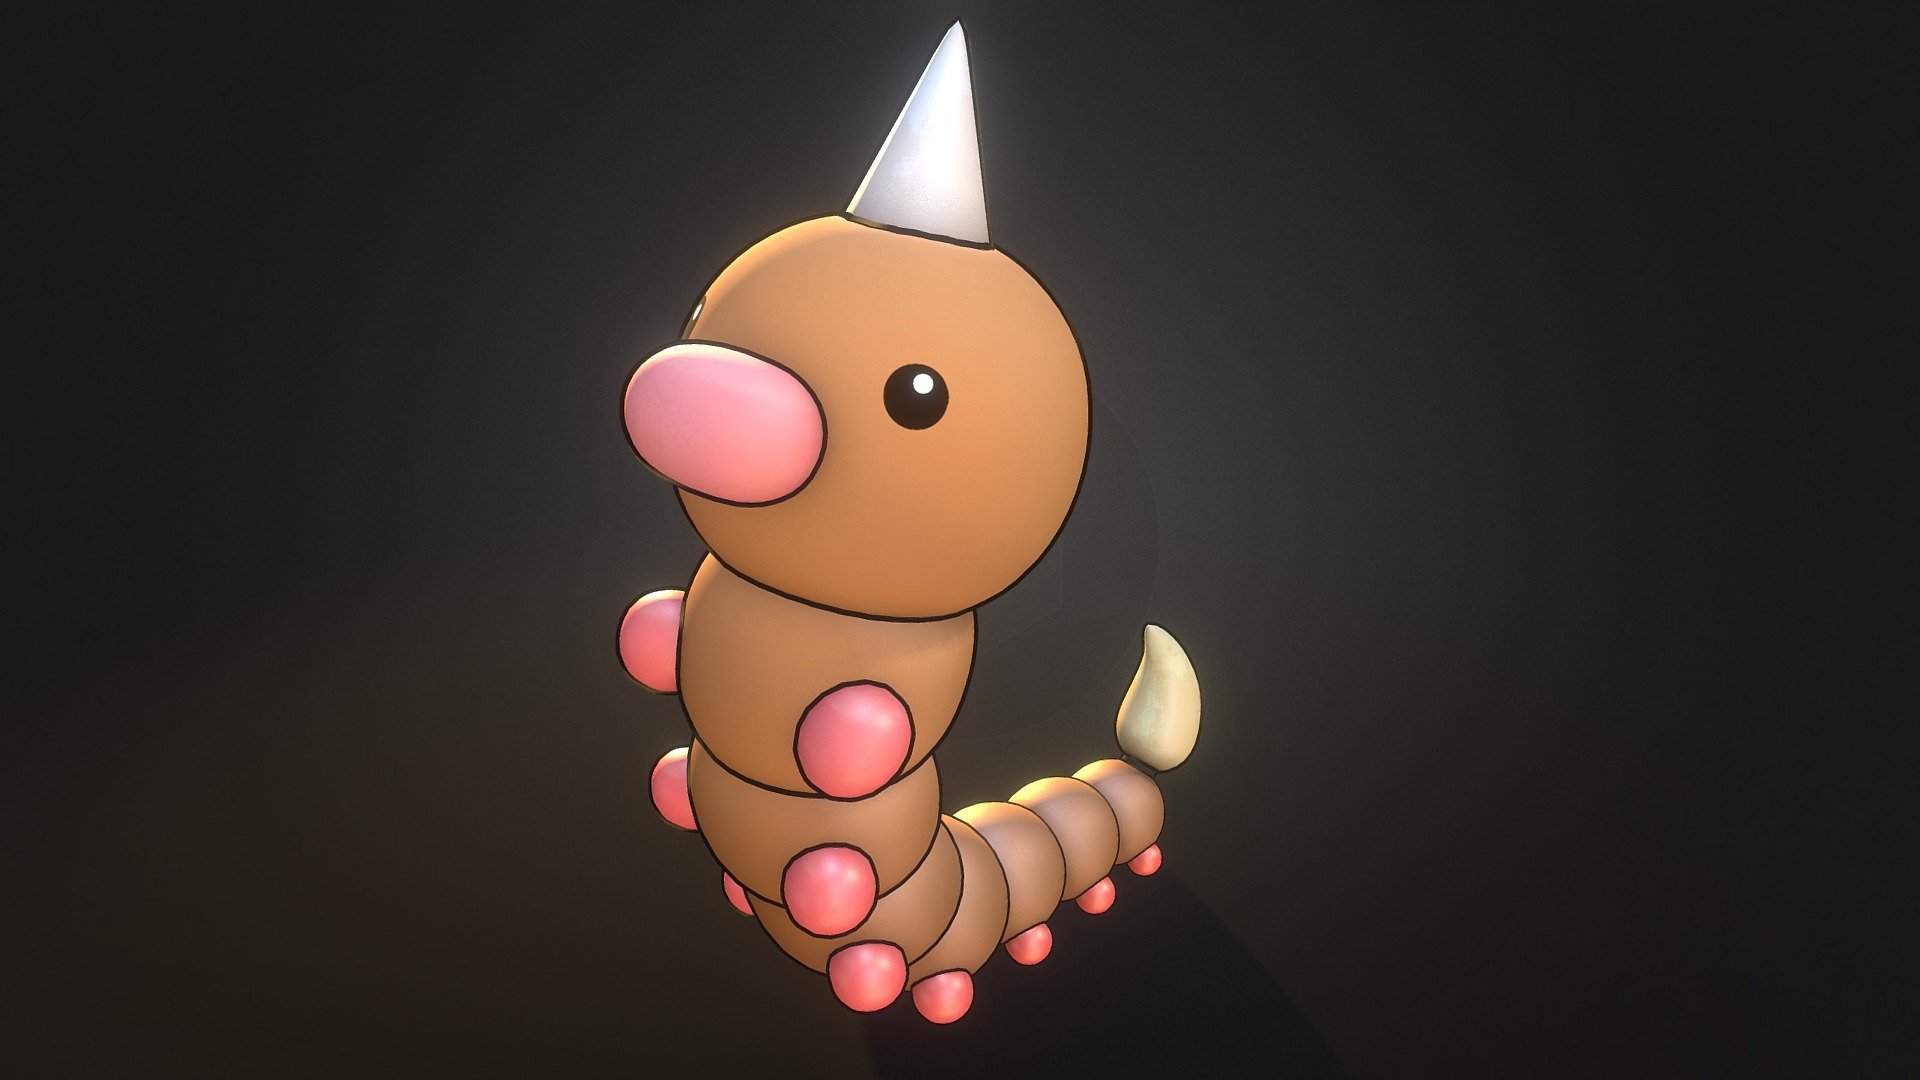 The simple one. In fact it was so simple that I decided to finaly make a scripts for outline meshes. You can see me struggling in last making of on my youtube channel. (Search Simon Telezhkin) - Weedle Pokemon - 3D model by 3dlogicus 3d model